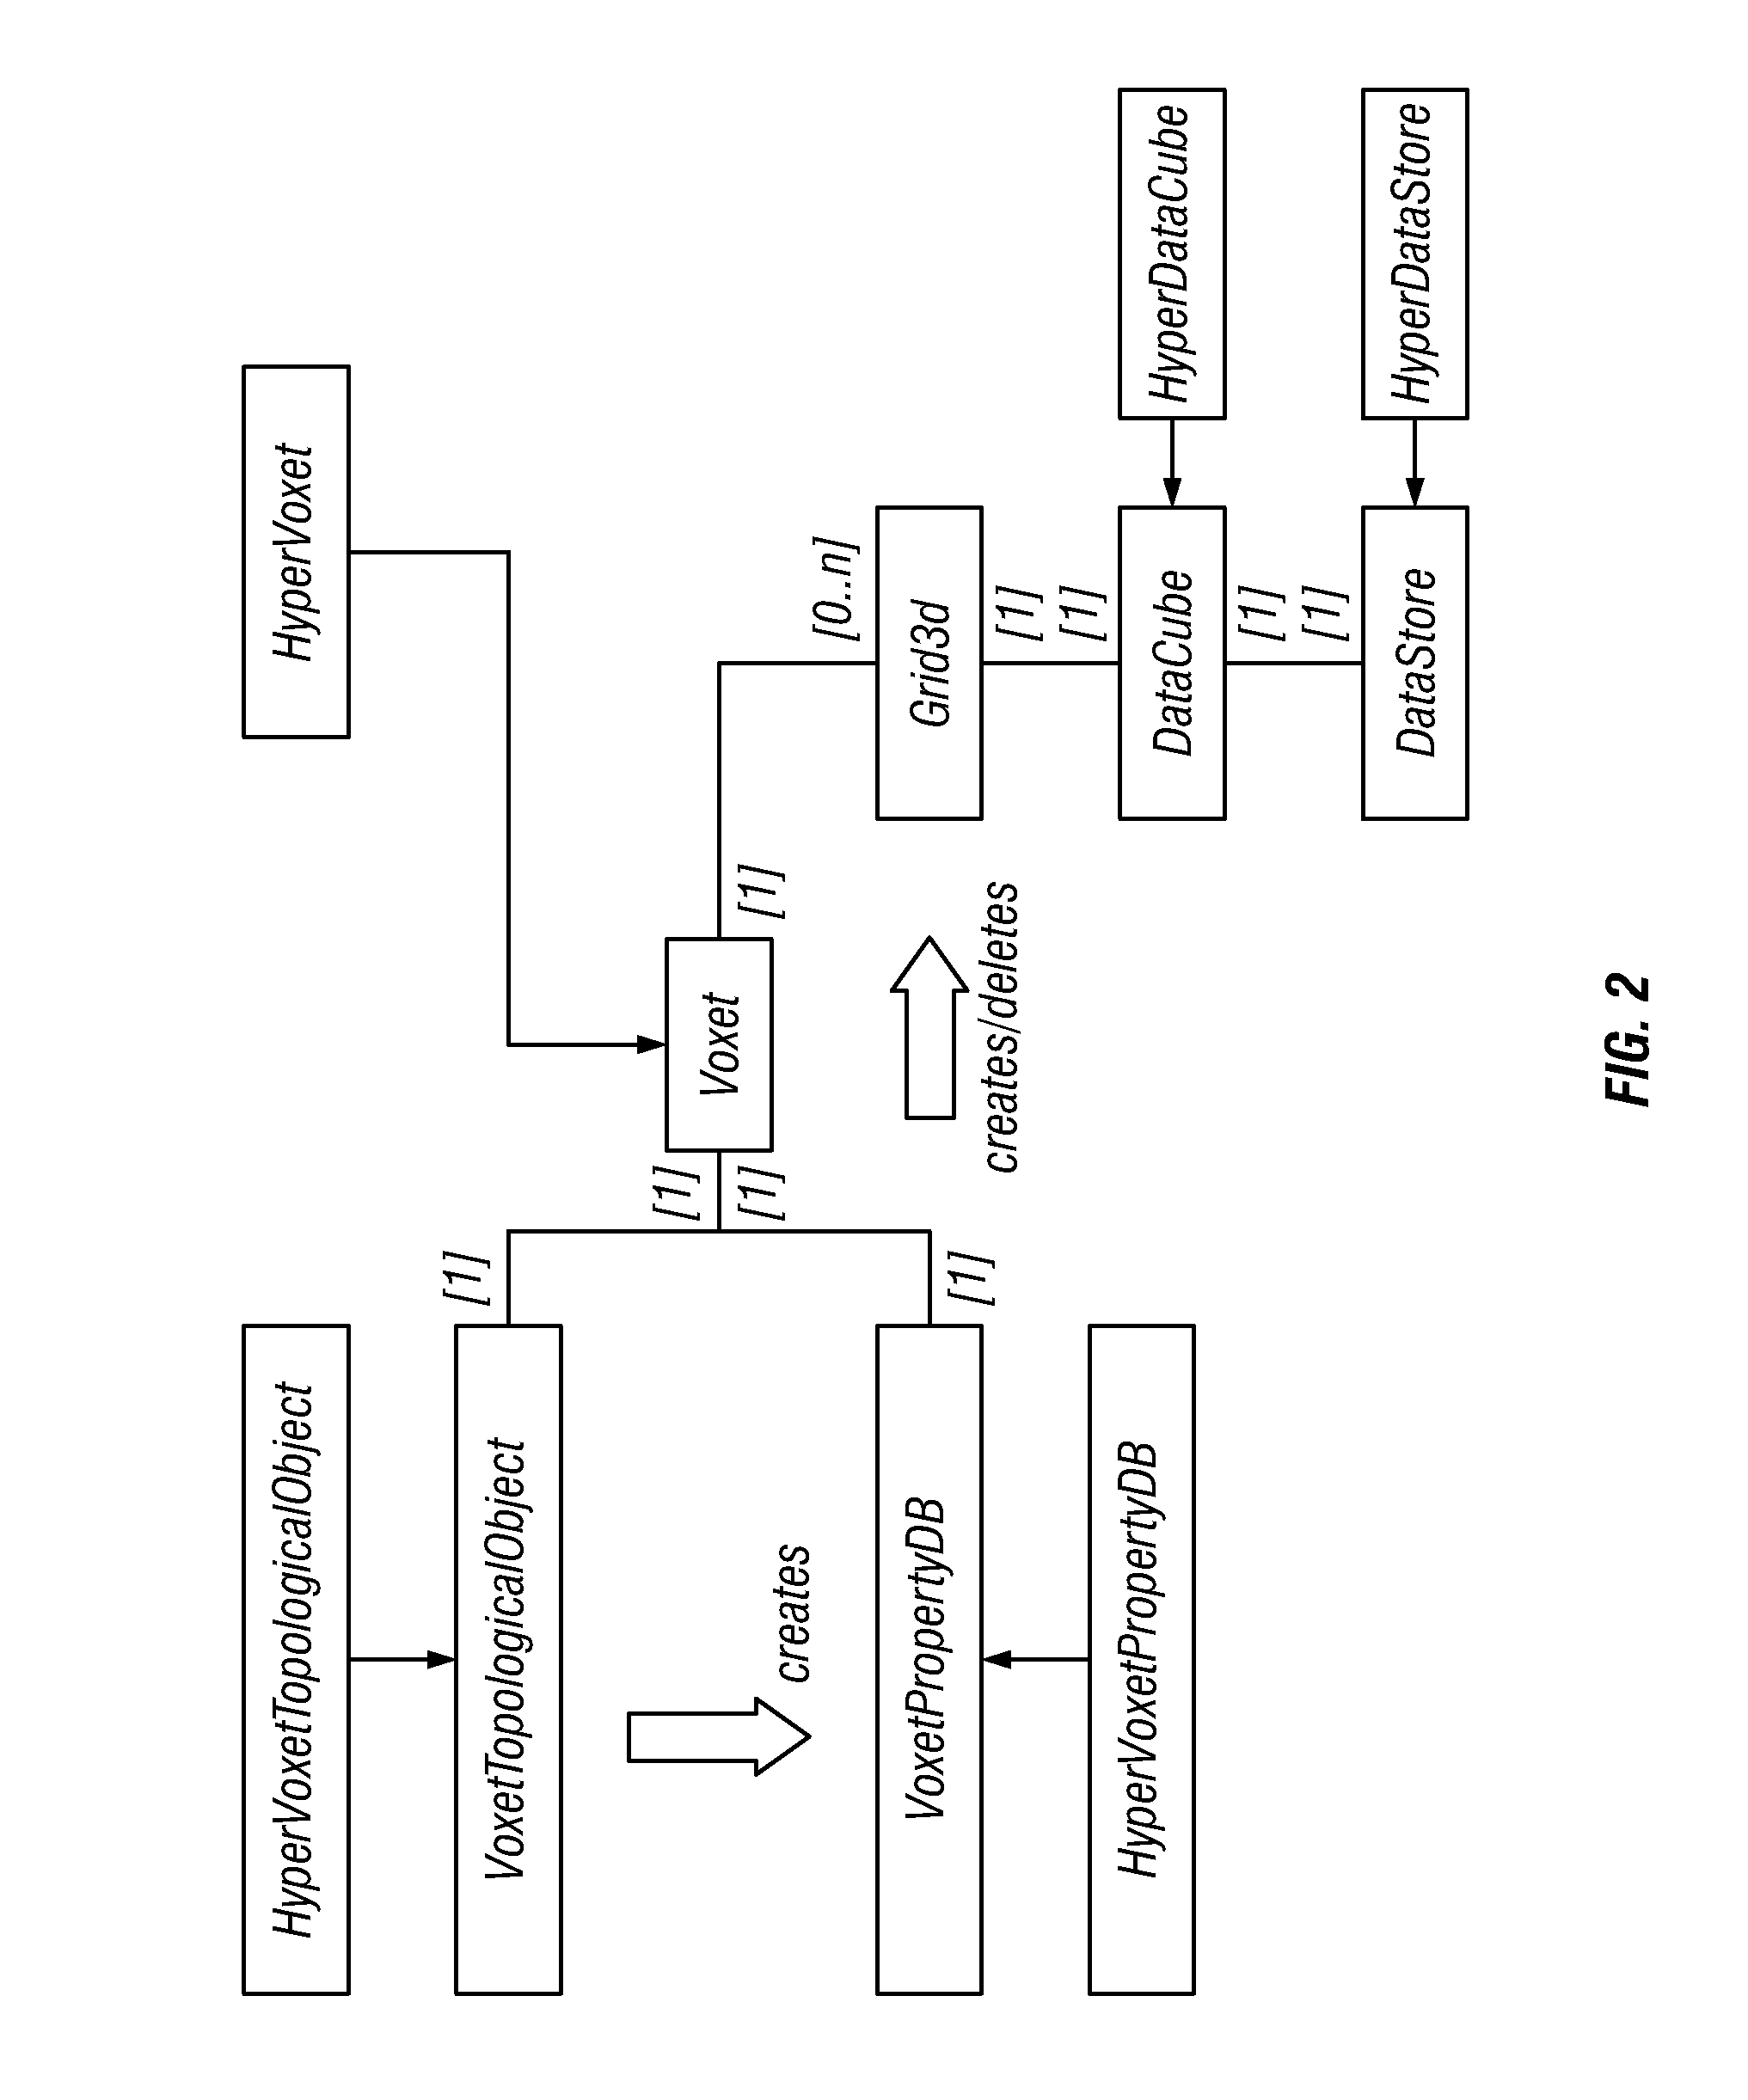 4d+ prestack seismic data structure, and methods and apparatus for processing 4d+ prestack seismic data